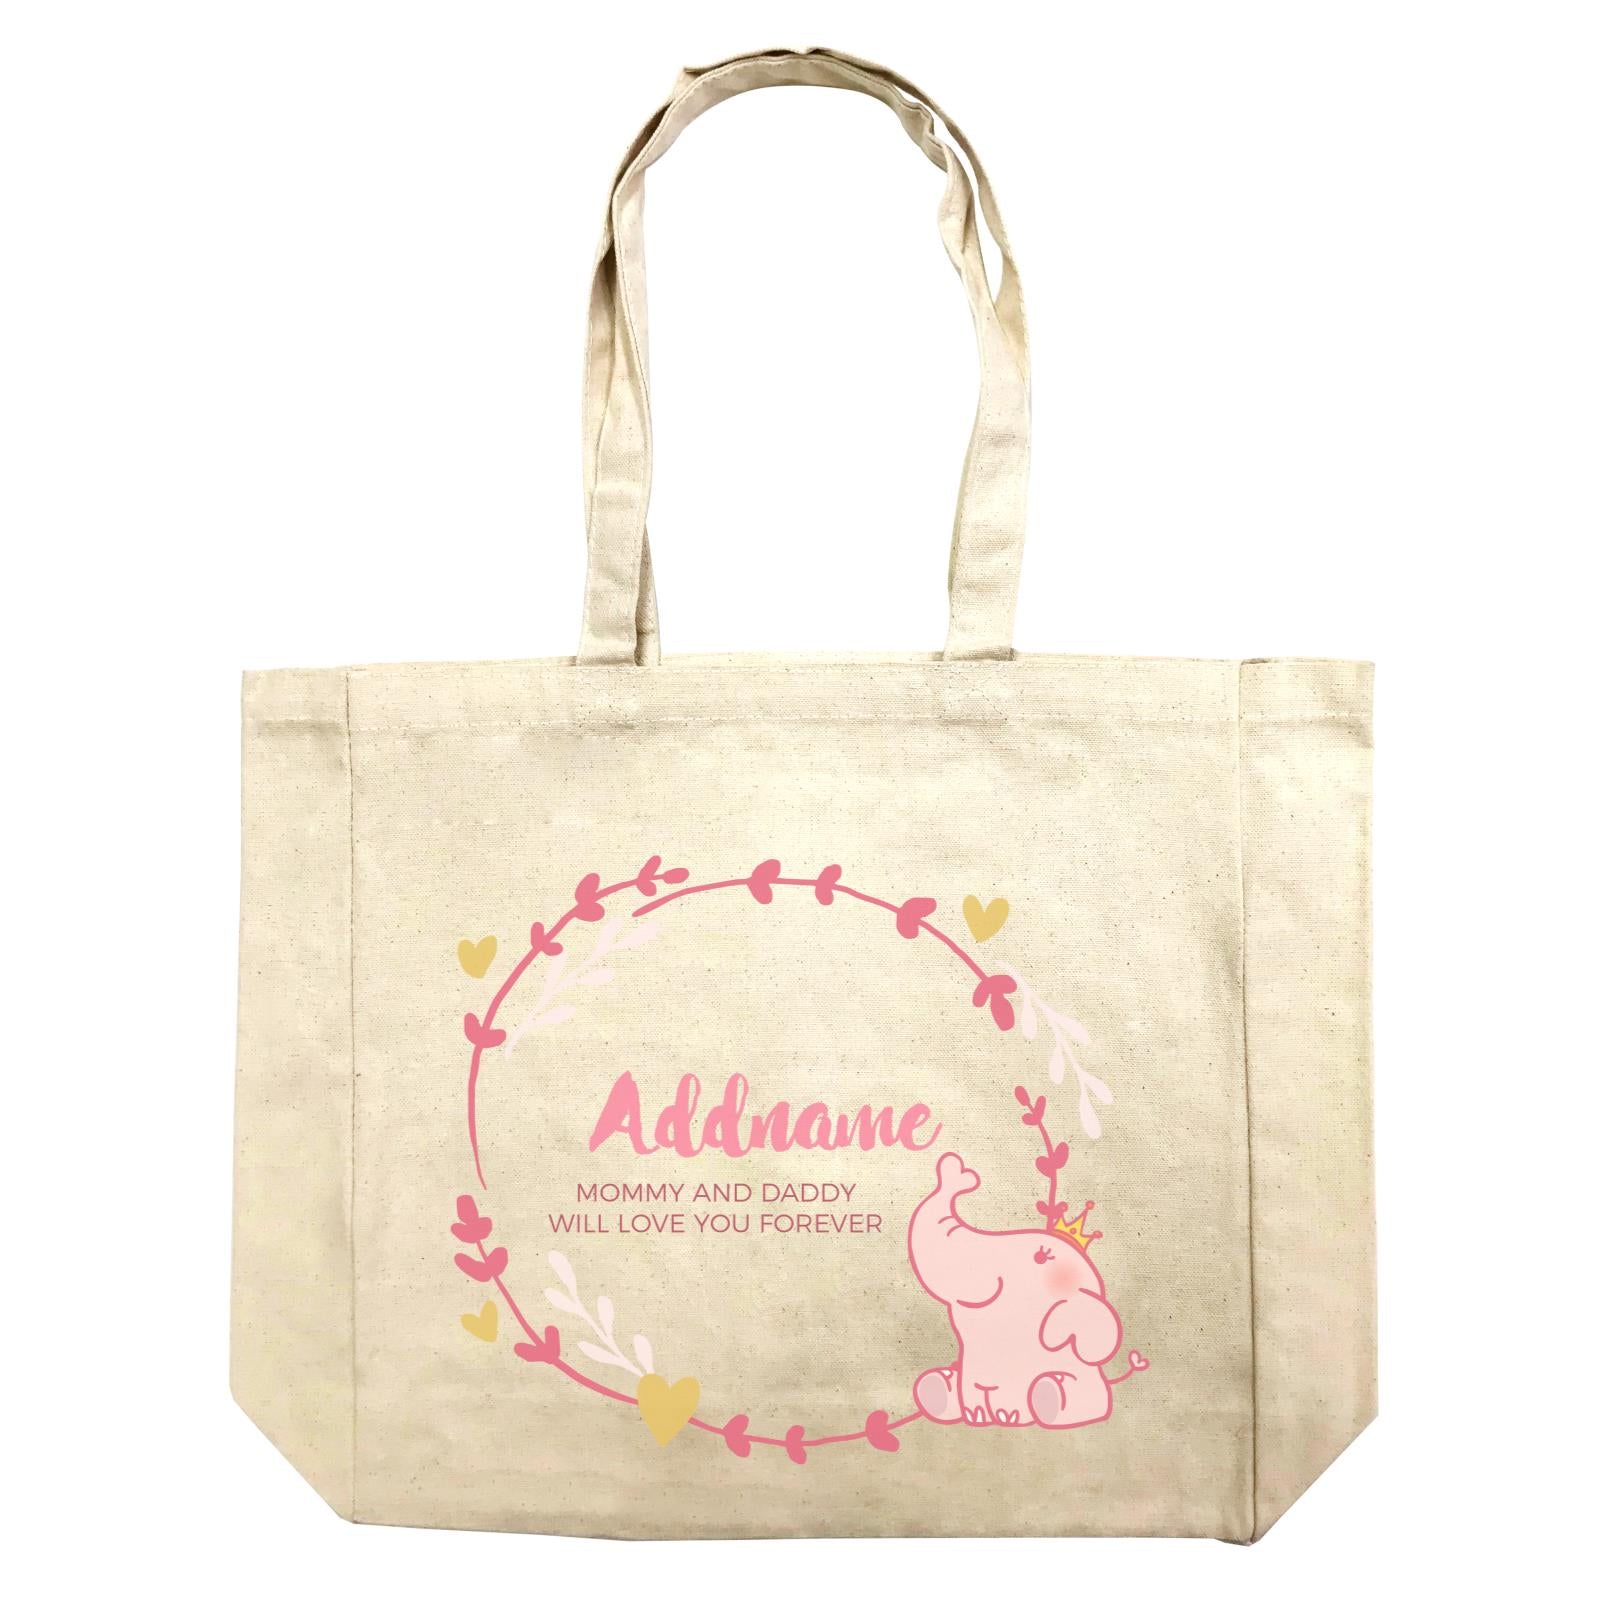 Cute Pink Elephant Princess Personalizable with Name and Text Shopping Bag